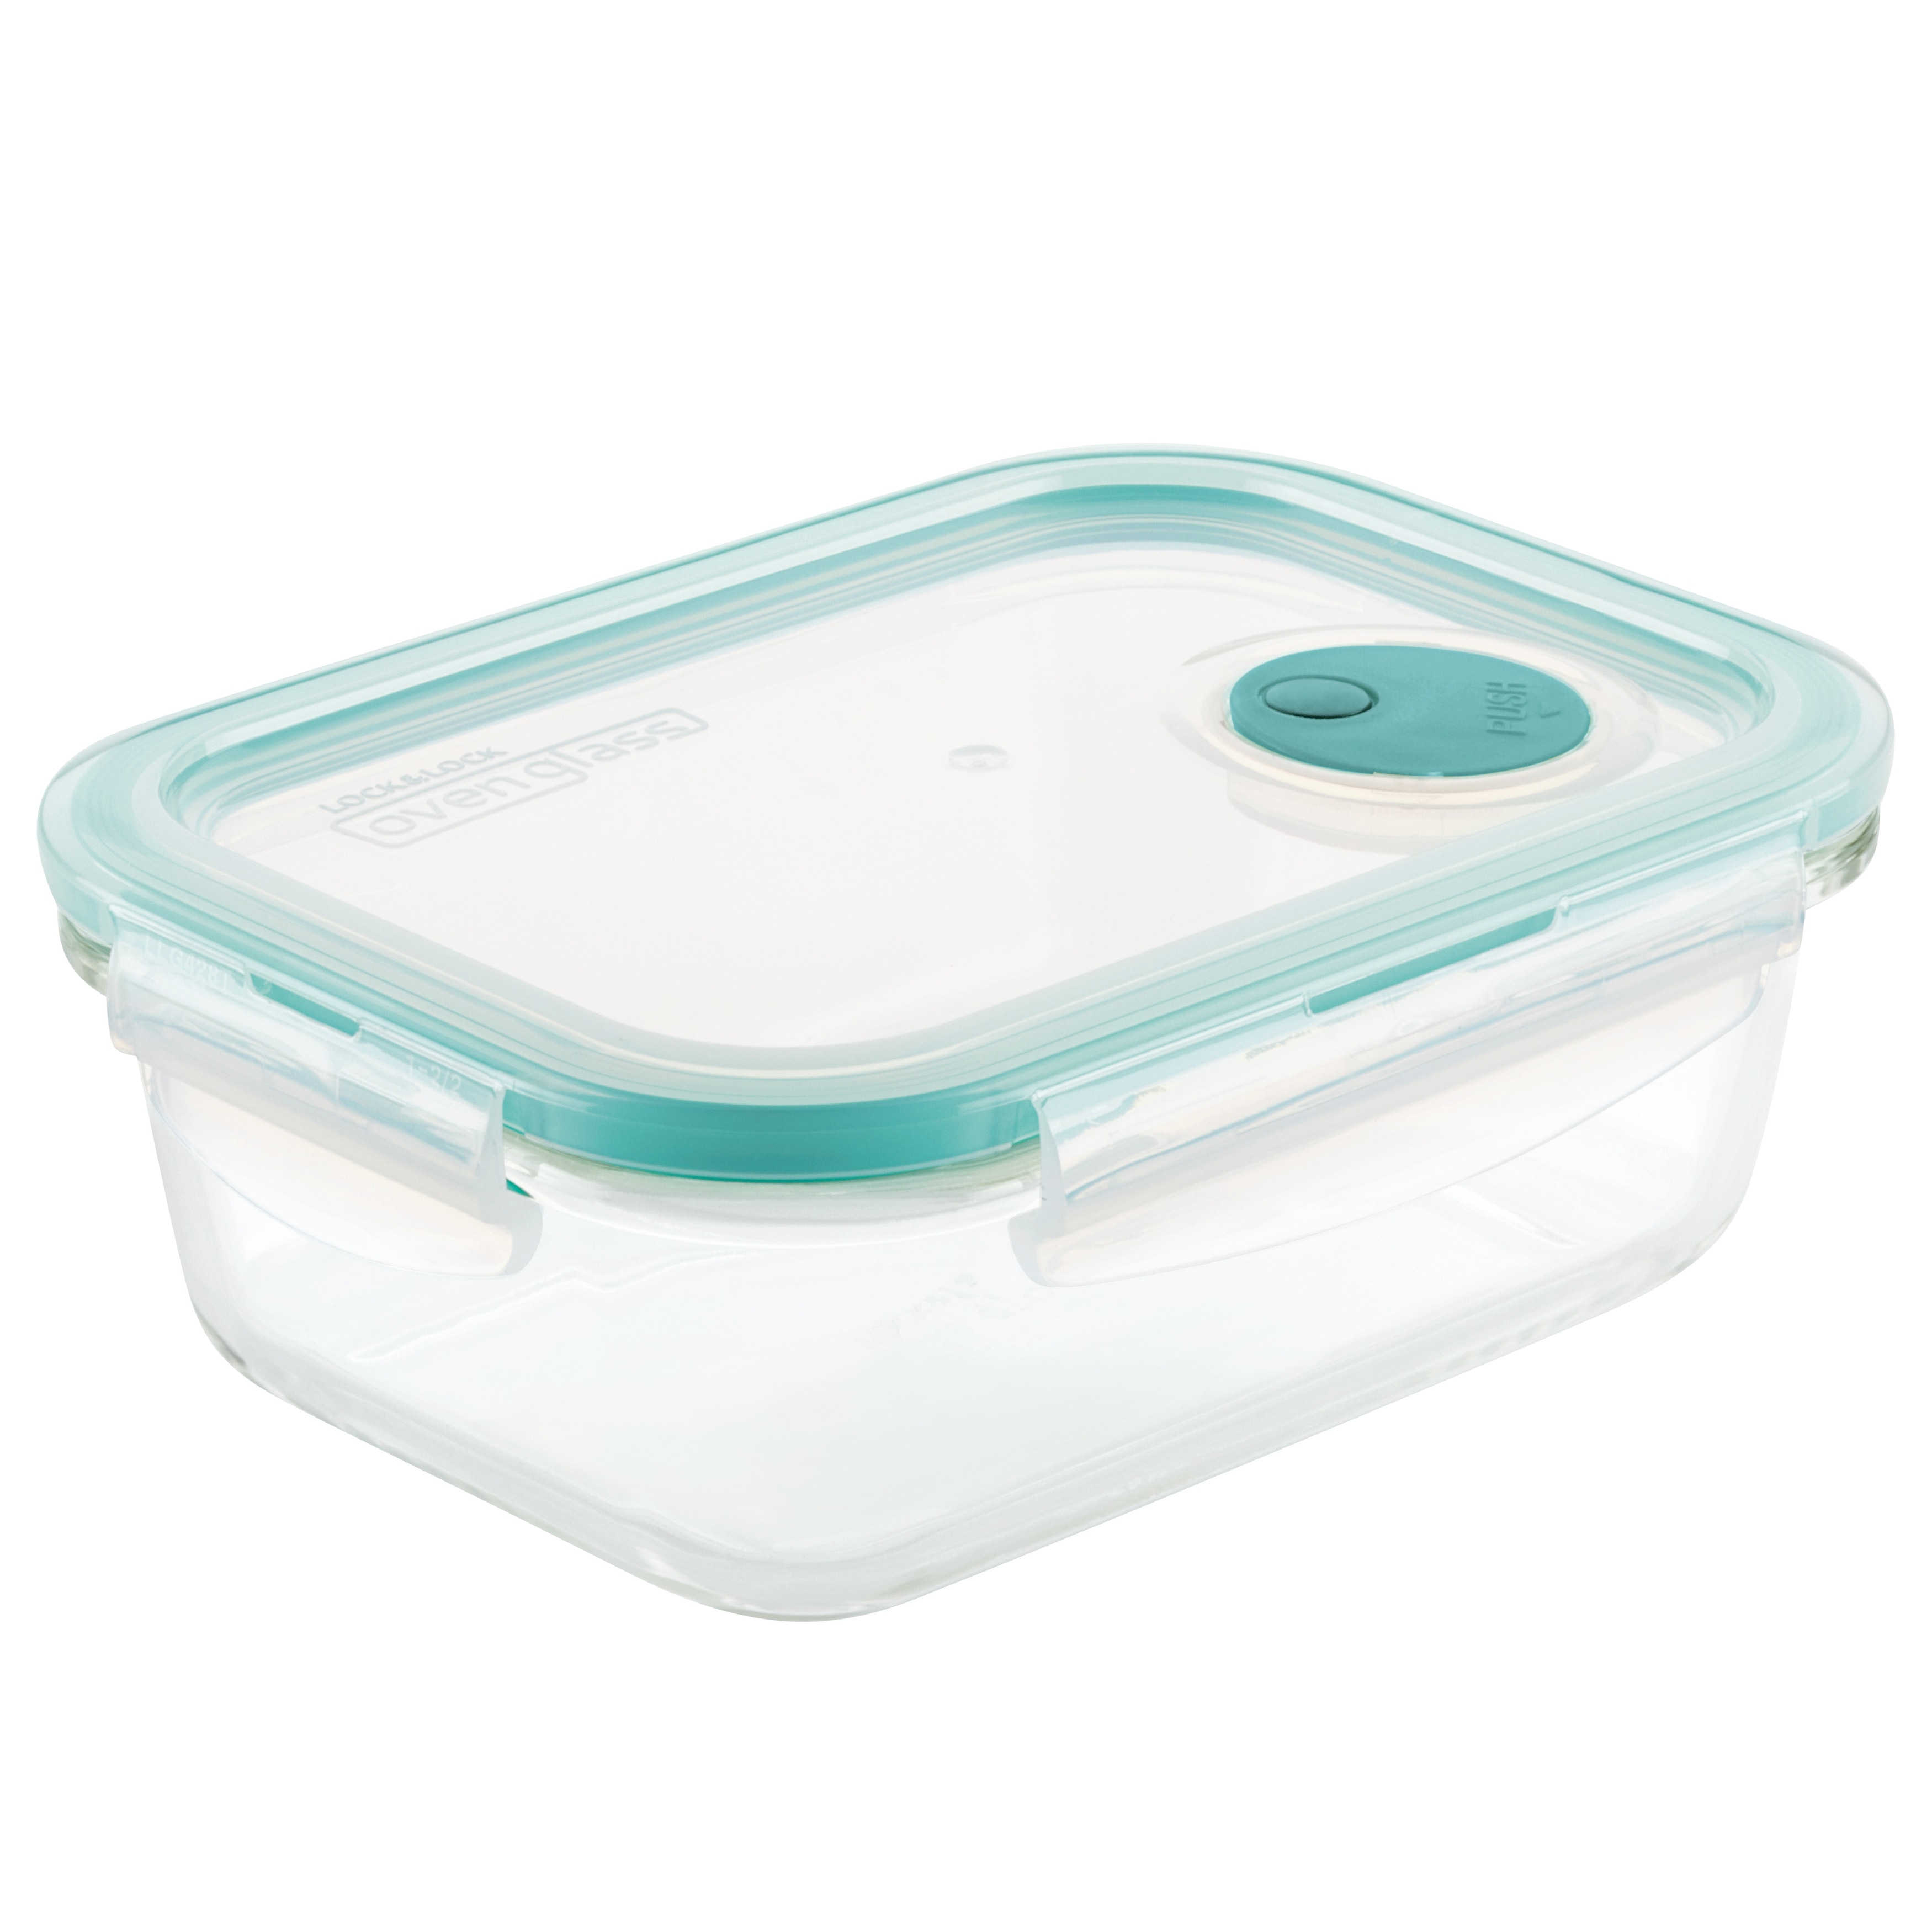 https://ak1.ostkcdn.com/images/products/is/images/direct/0be3372e3be0366d4fdfa0ffb0ba8a0a98c5fa63/LocknLock-Purely-Better-Vented-Glass-Food-Storage-Containers%2C-21-Ounce%2C-Set-of-Four.jpg